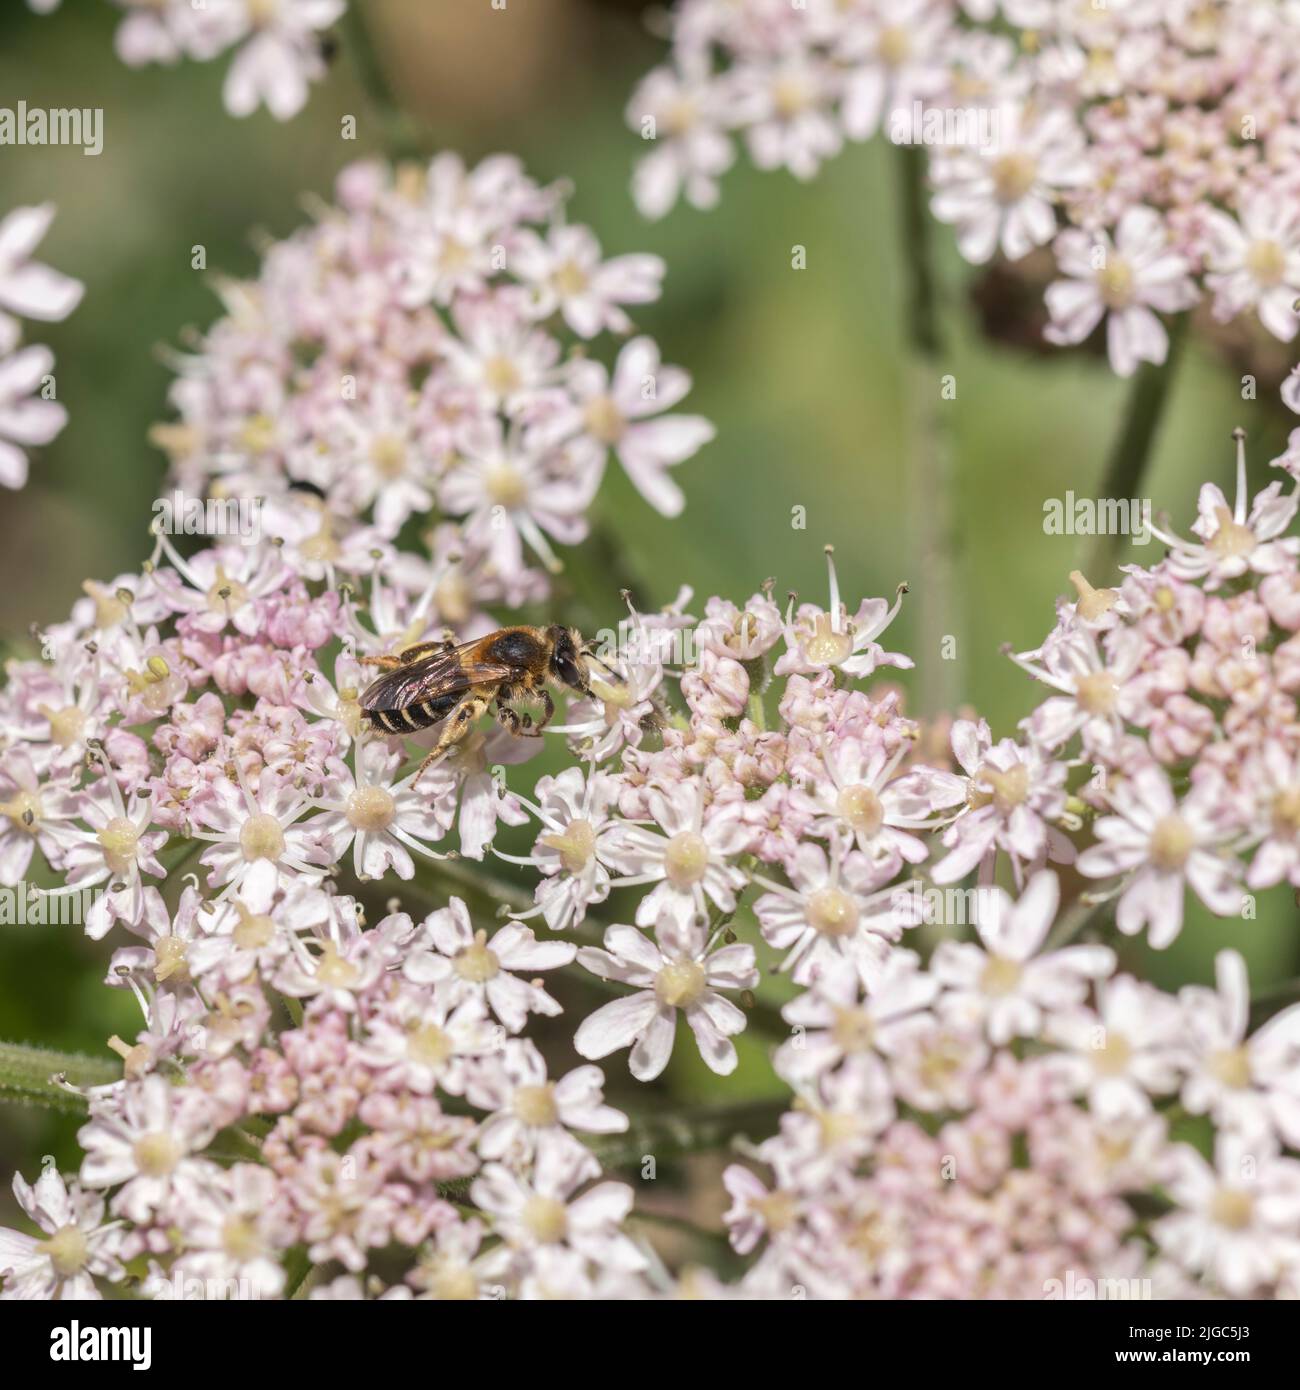 Bee-like flying insect foraging feeding on white Hogweed / Heracleum sphondylium flowers. Insects UK. Cow parsley family. Stock Photo